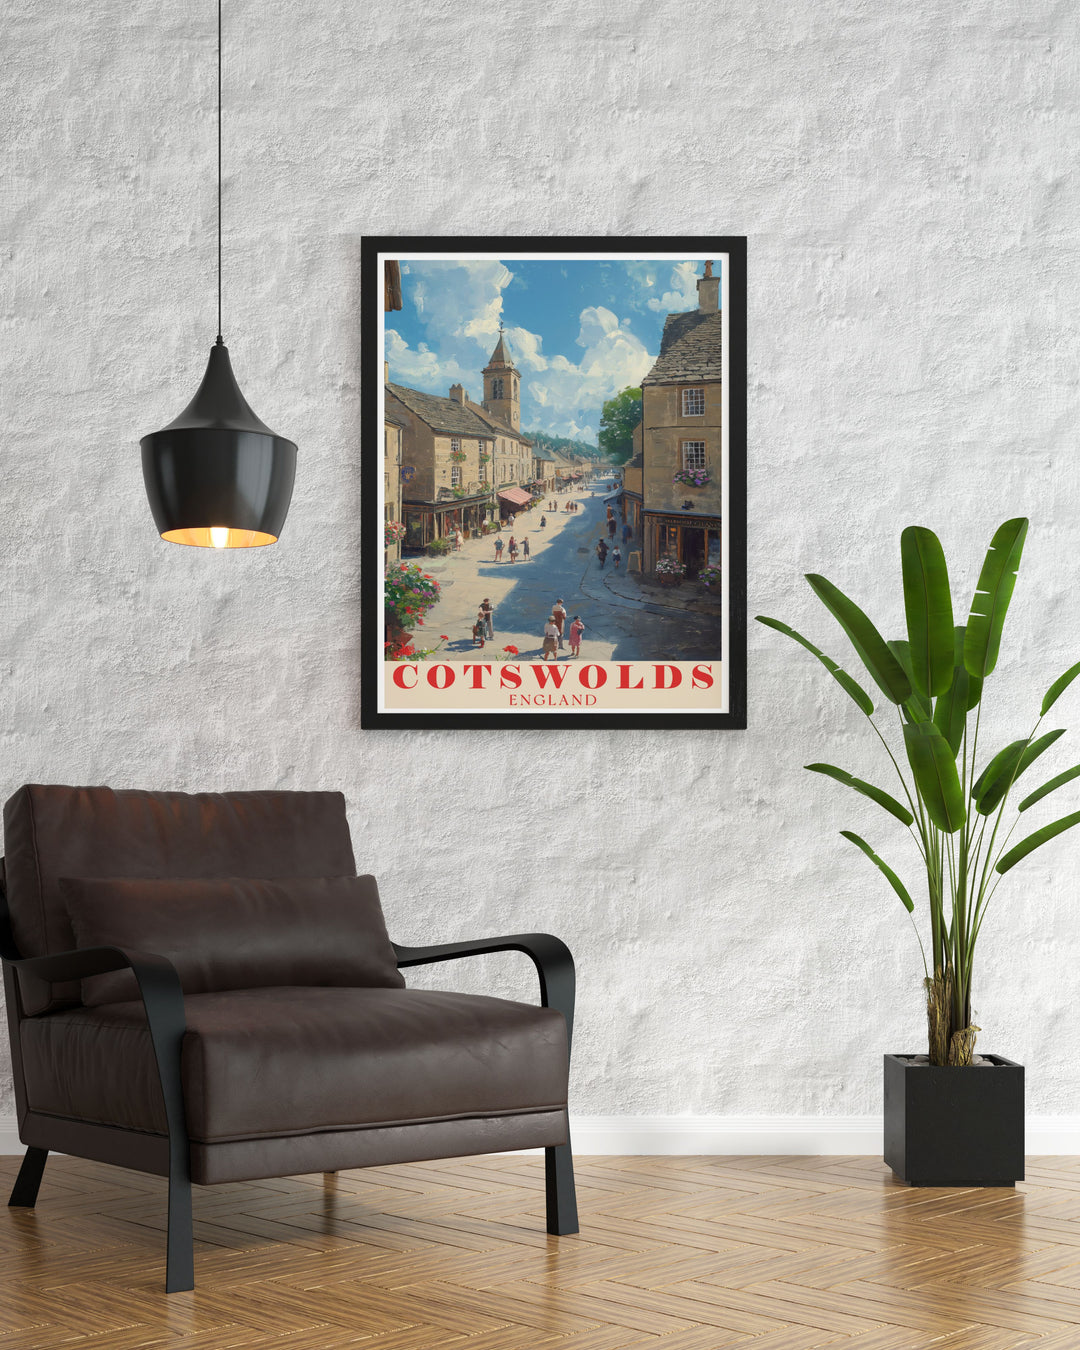 This artistic poster captures the picturesque landscapes of the Cotswolds and the historic charm of Stow on the Wold Market Square, perfect for adding a touch of Englands natural splendor and cultural heritage to your decor.